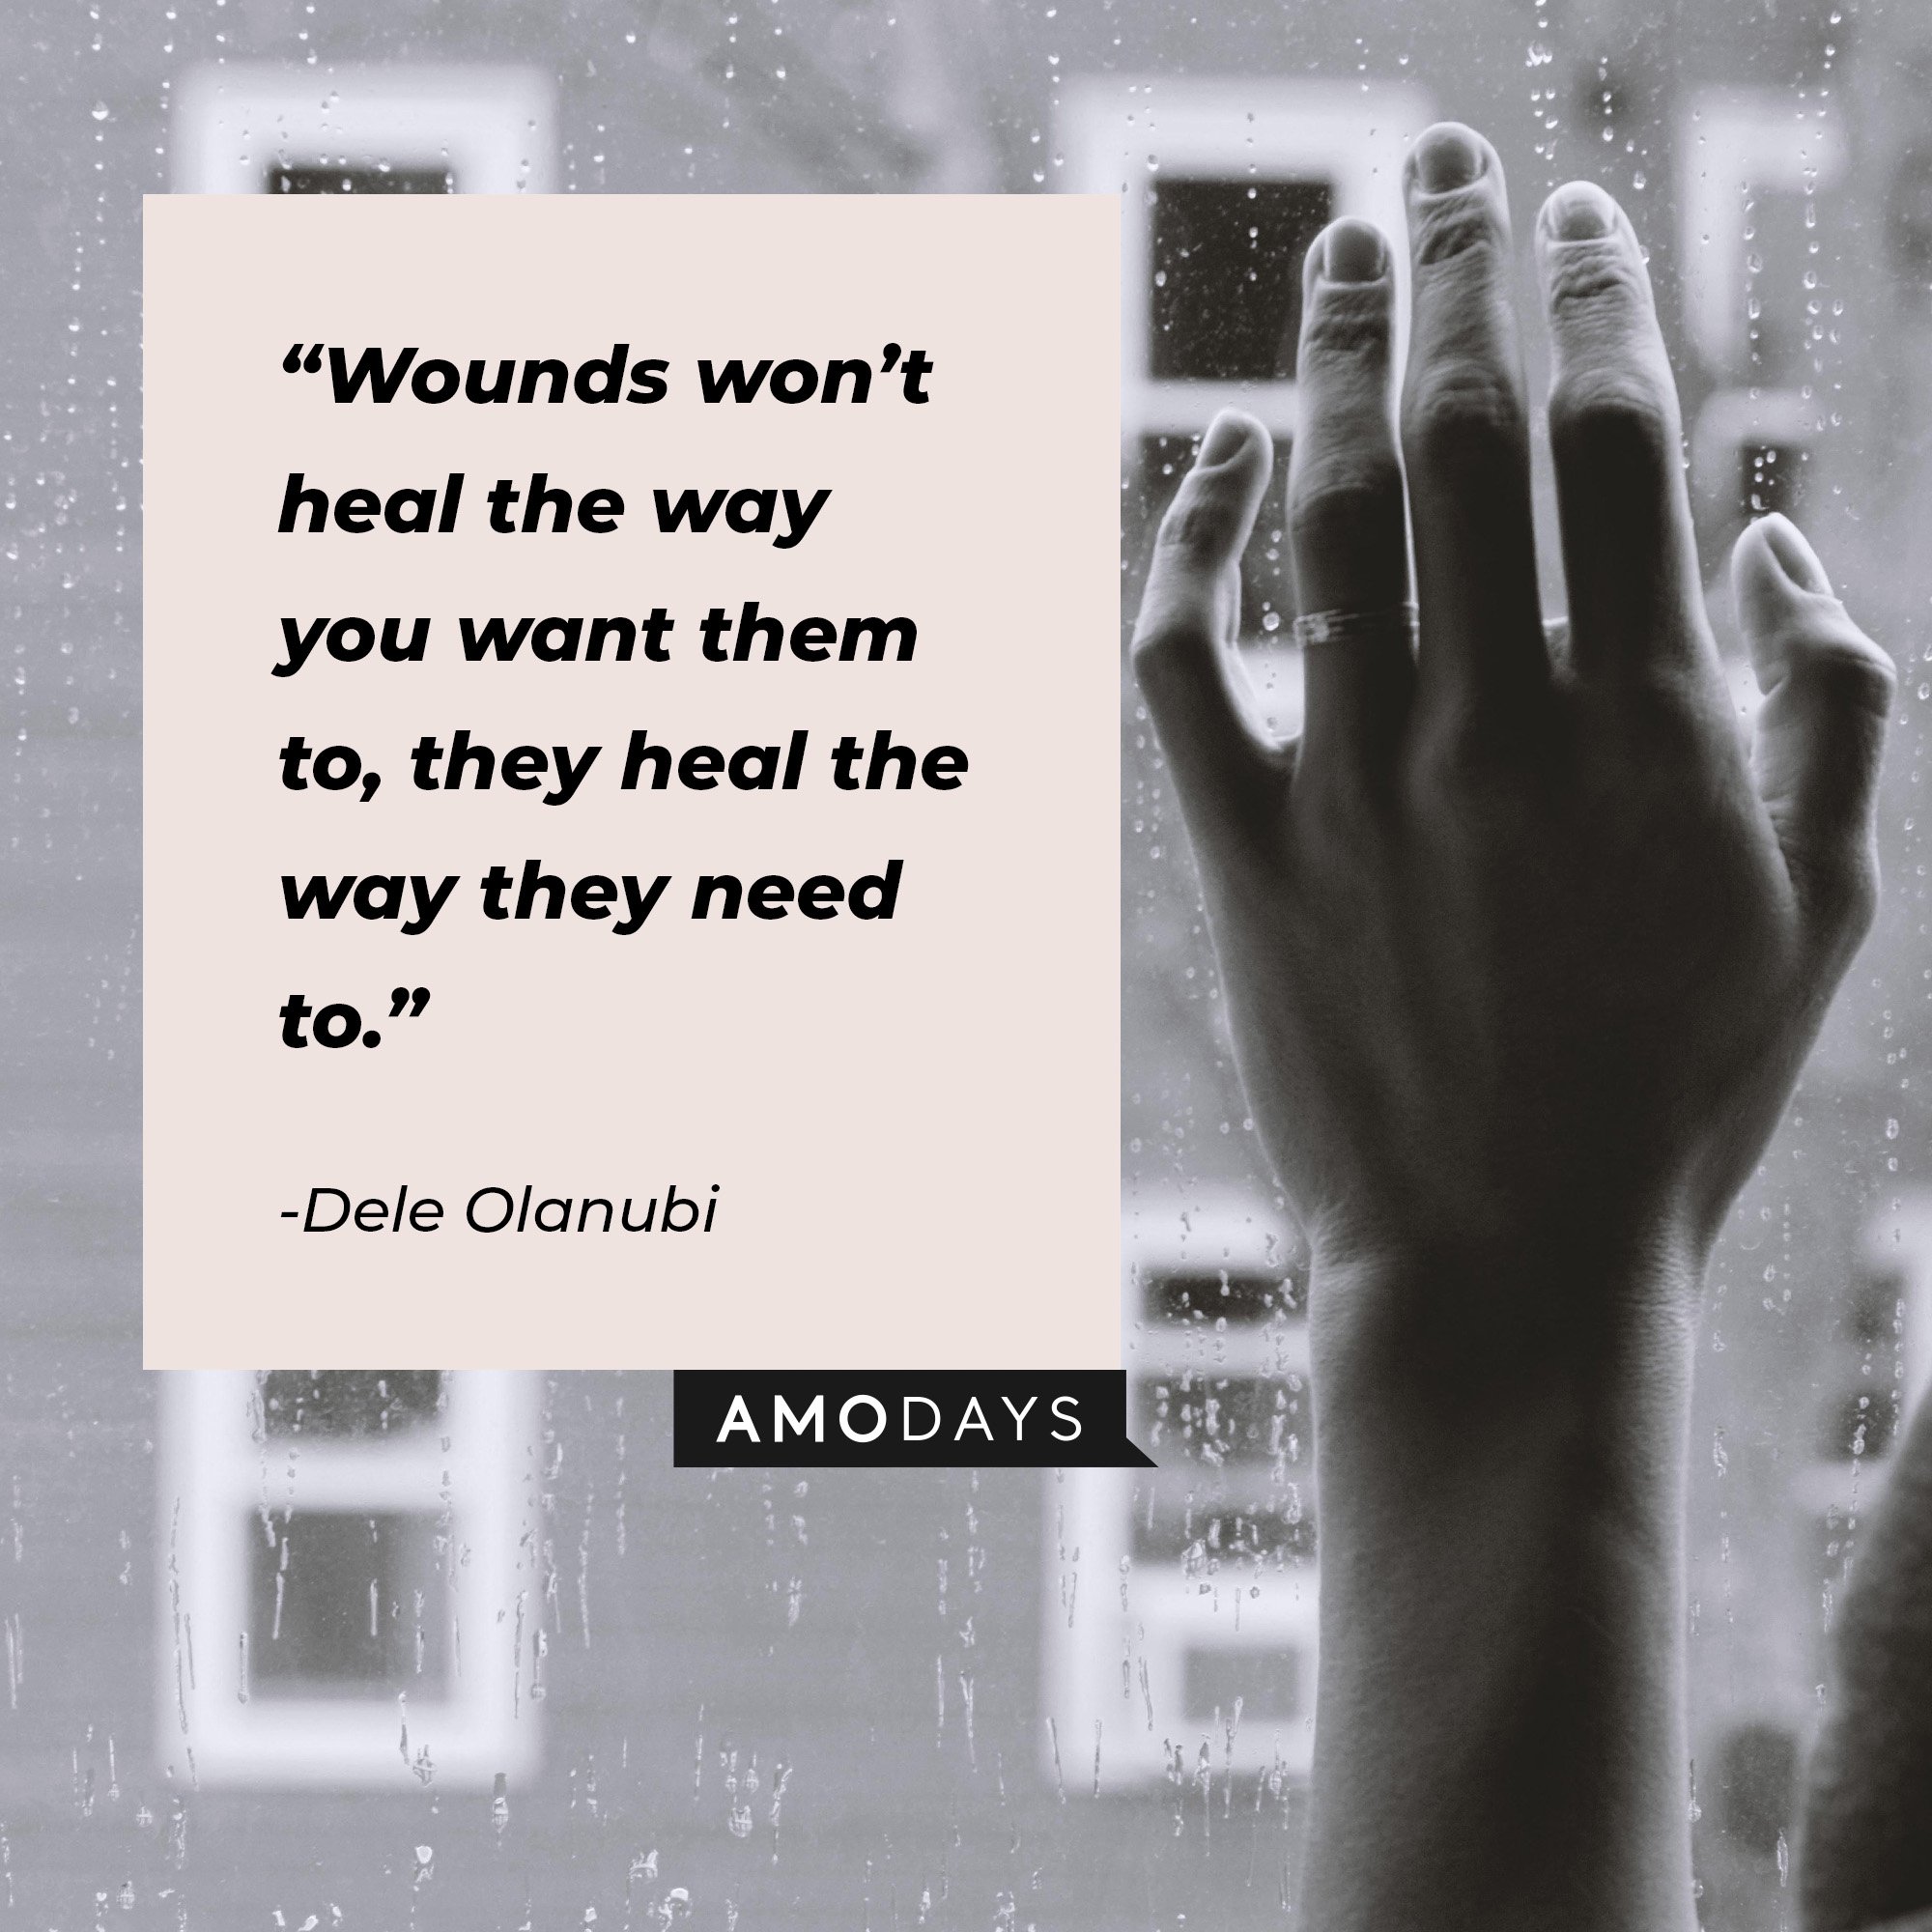 Dele Olanubi’s quote: “Wounds won’t heal the way you want them to, they heal the way they need to.” | Image: AmoDays  